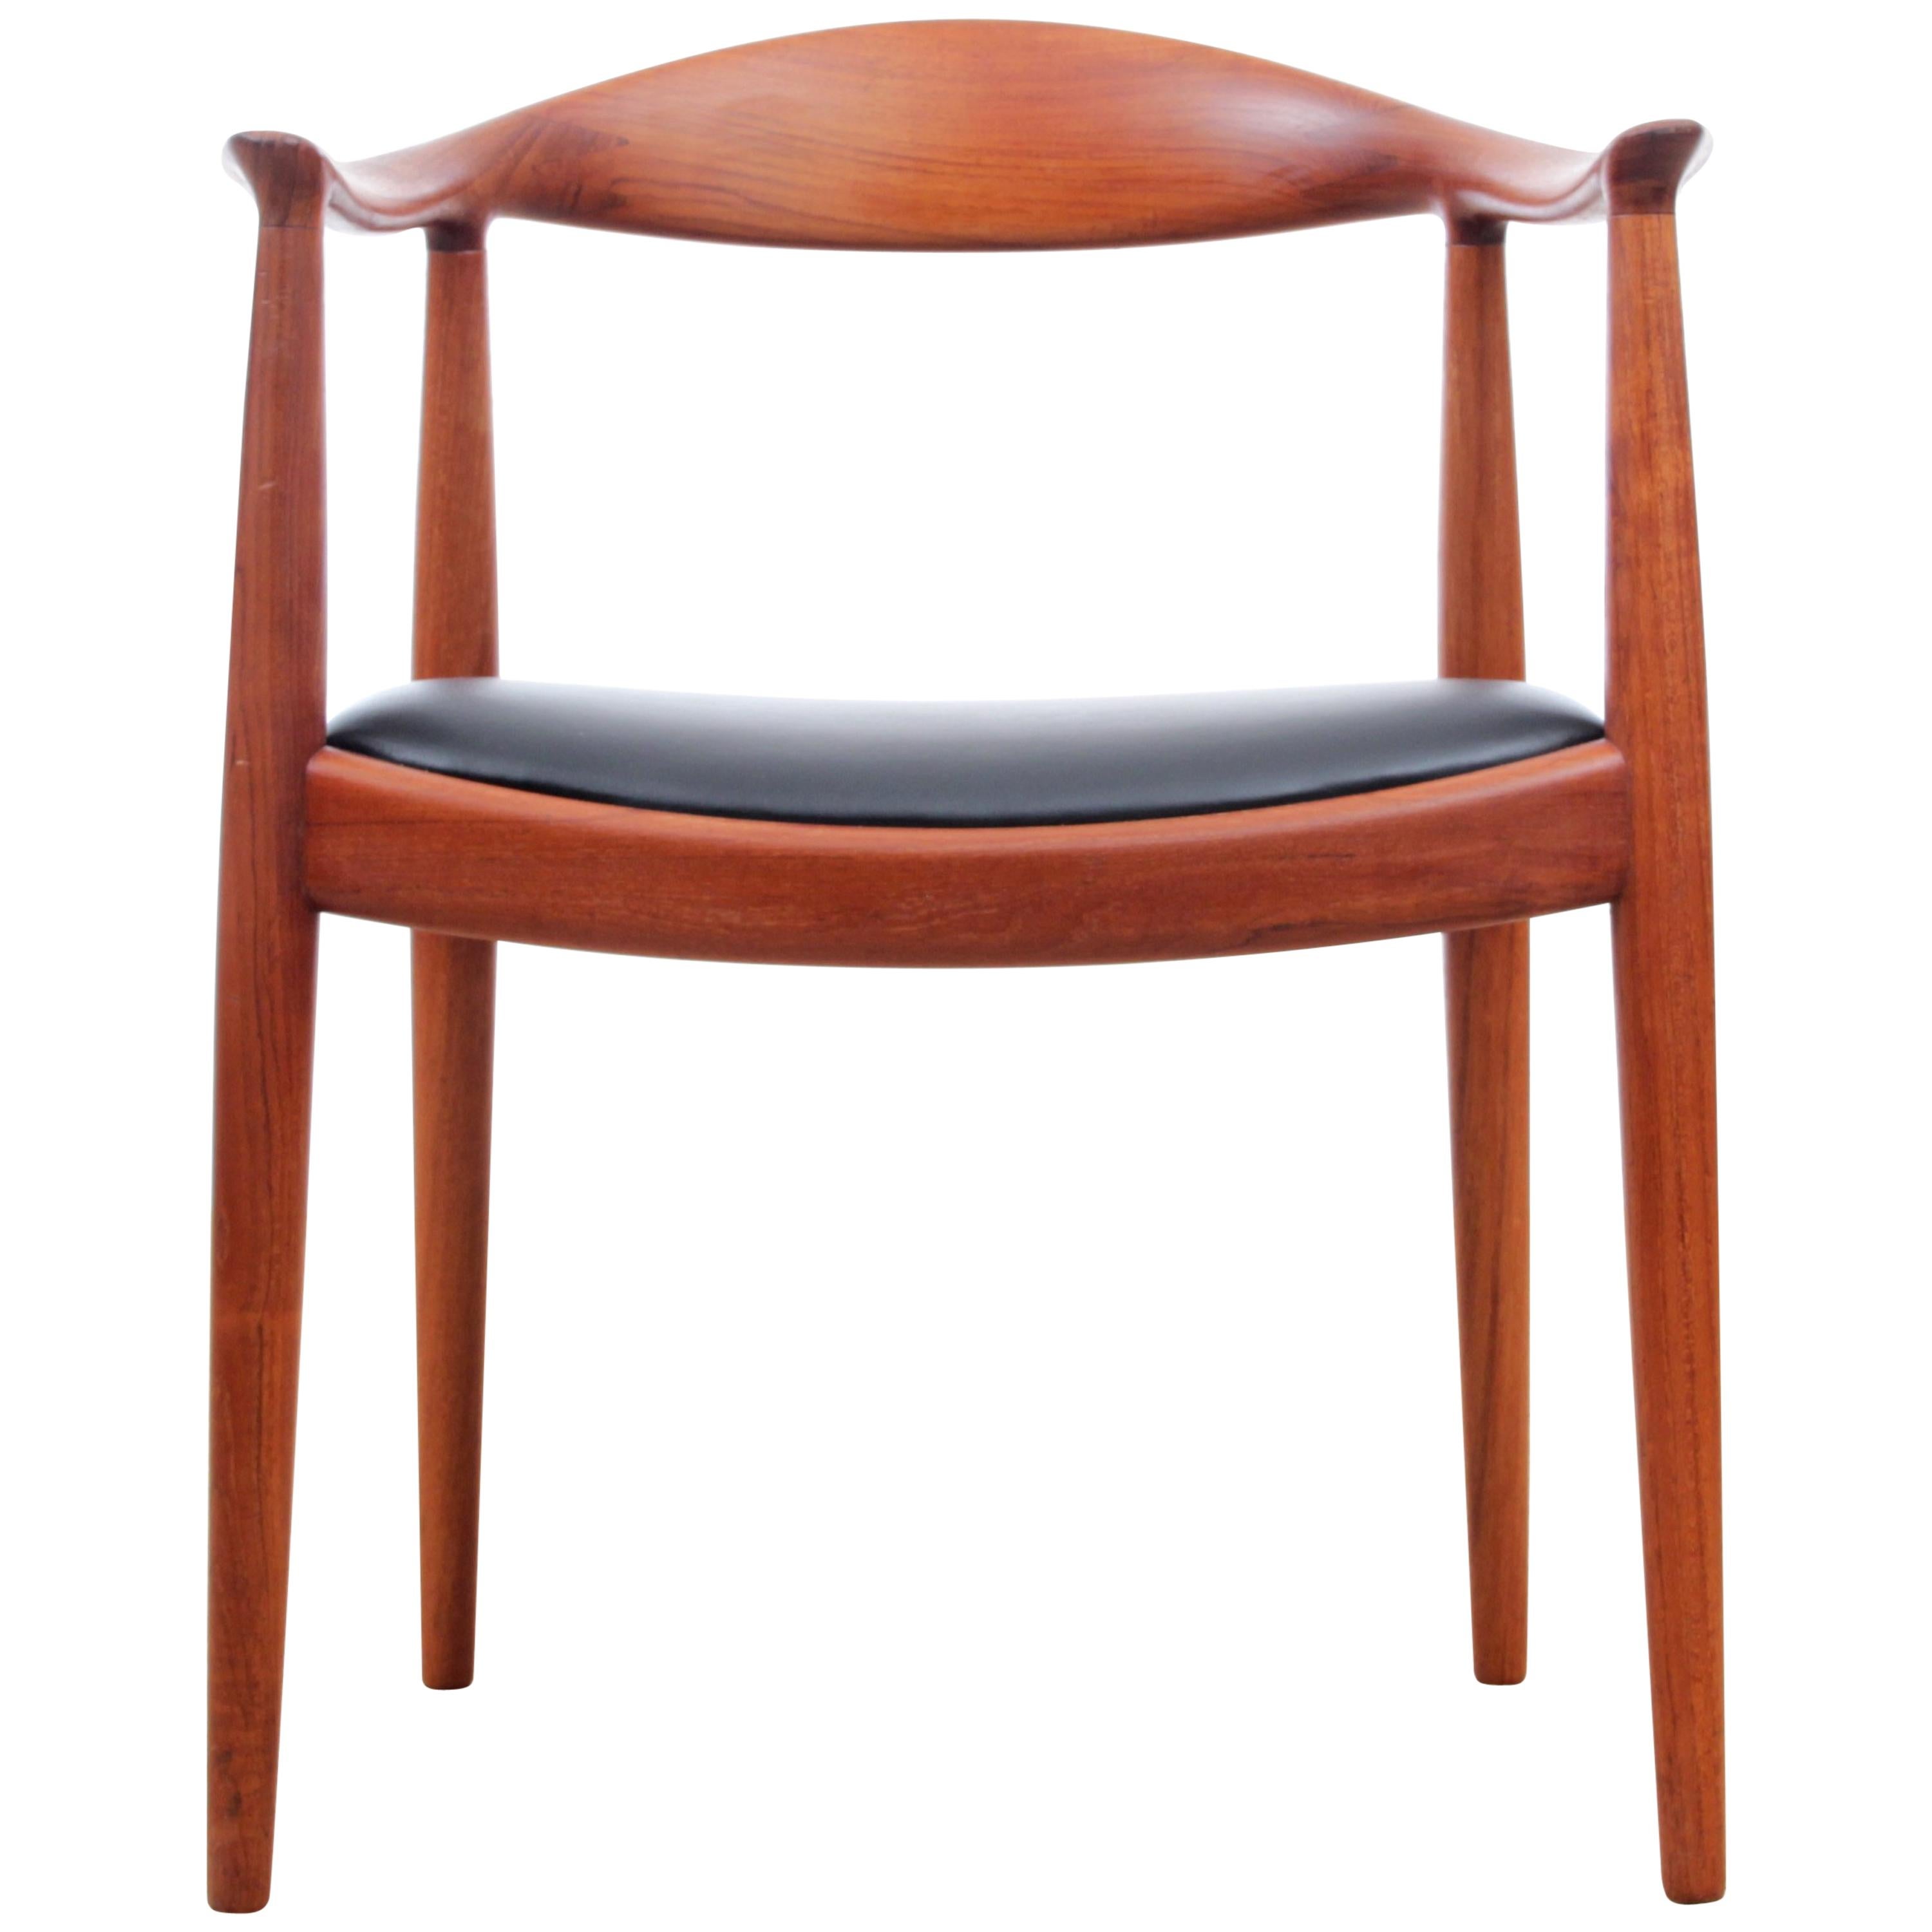 Set of two Scandinavian Armchairs "The Chair" in Solid Teak by Hans Wegner